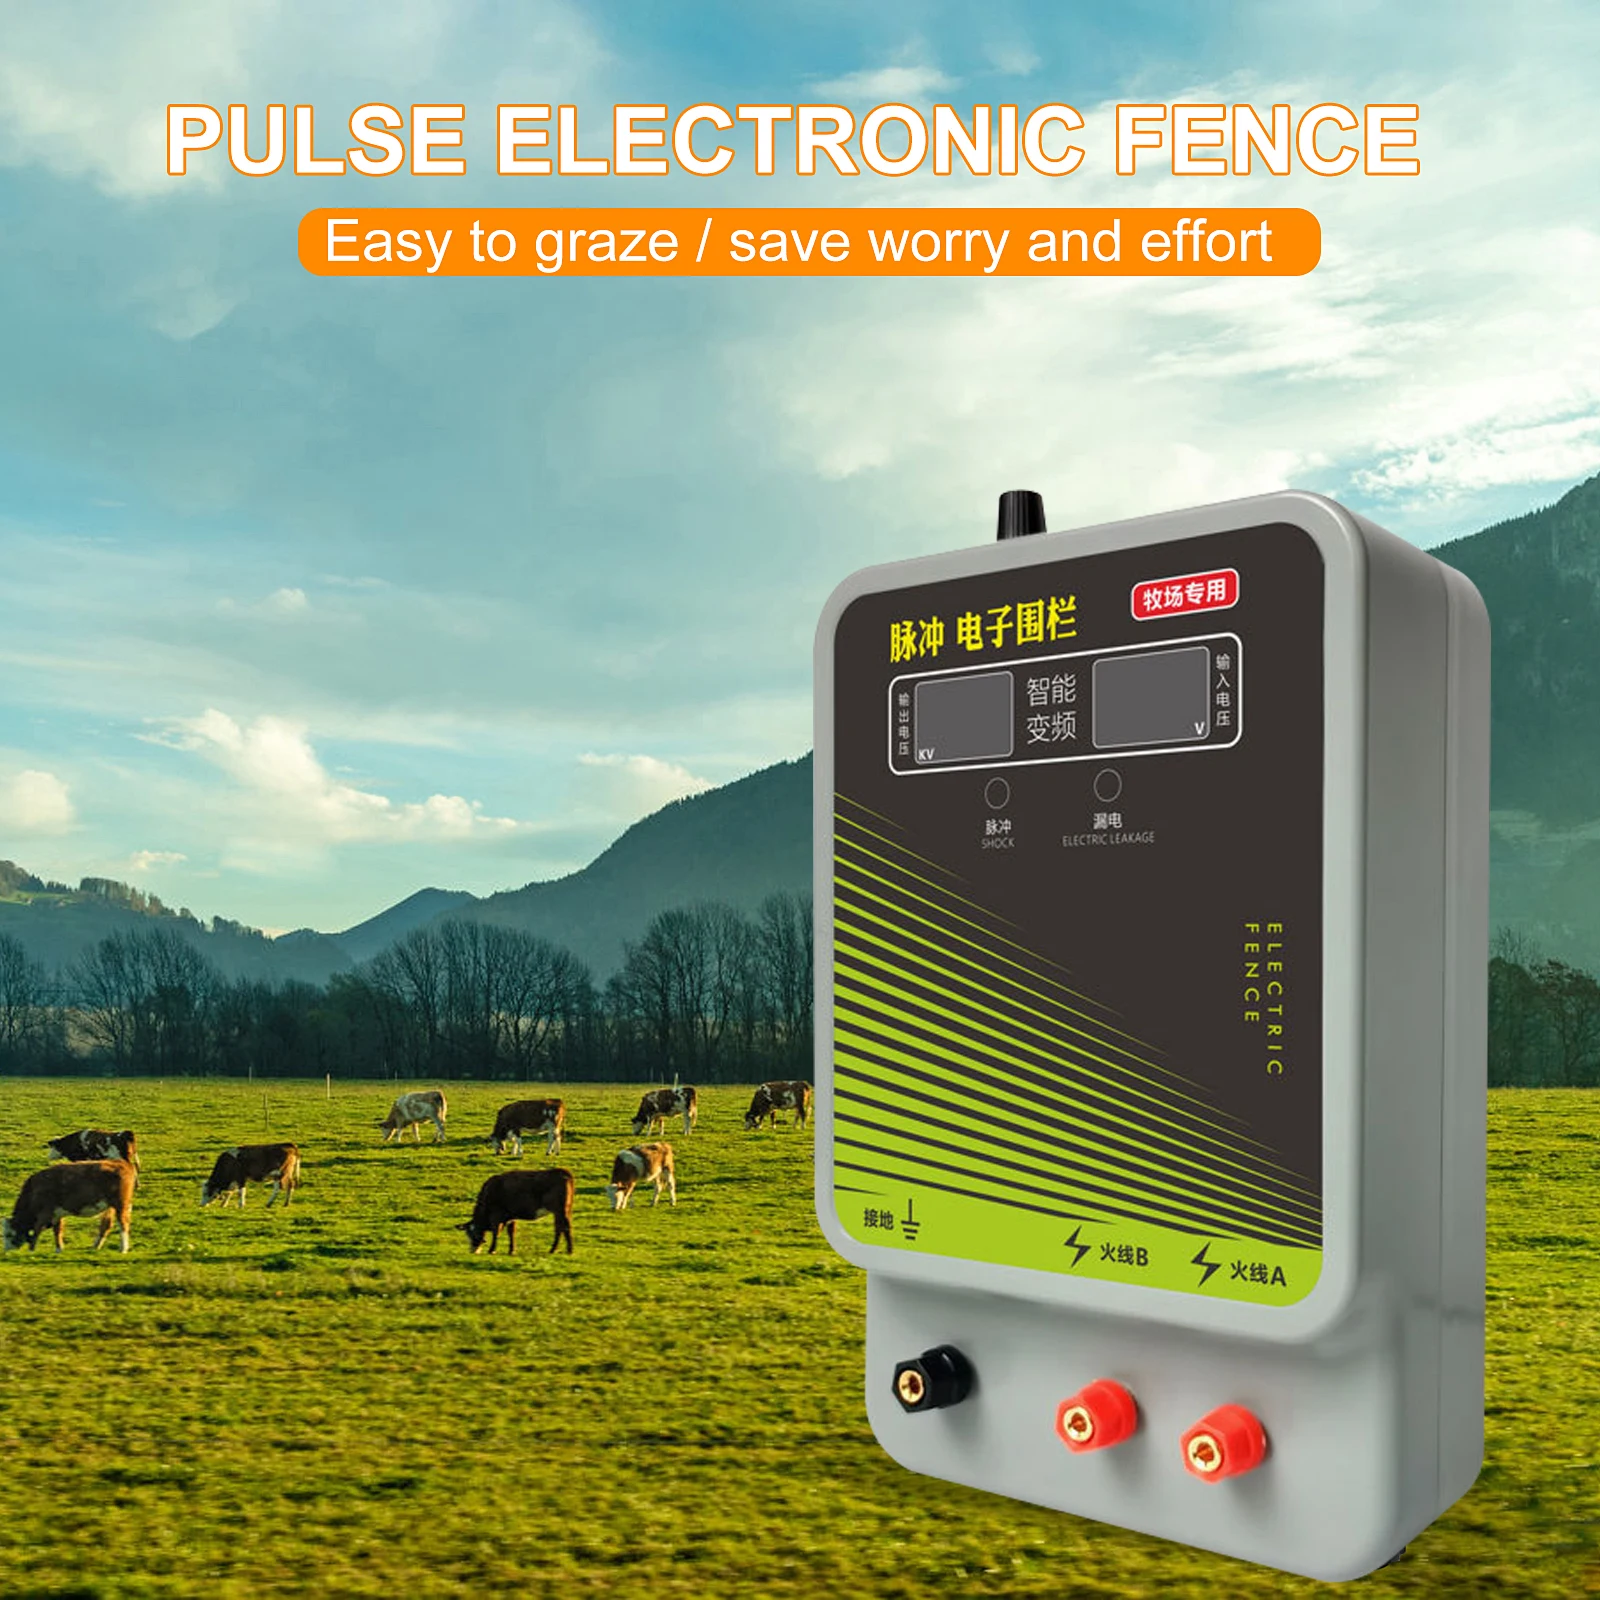 10KM Electric Fence Waterproof High Voltage Pulse Controller Horse Sheep Cattle Poultry Farm Animal Fence Alarm Livestock Tool